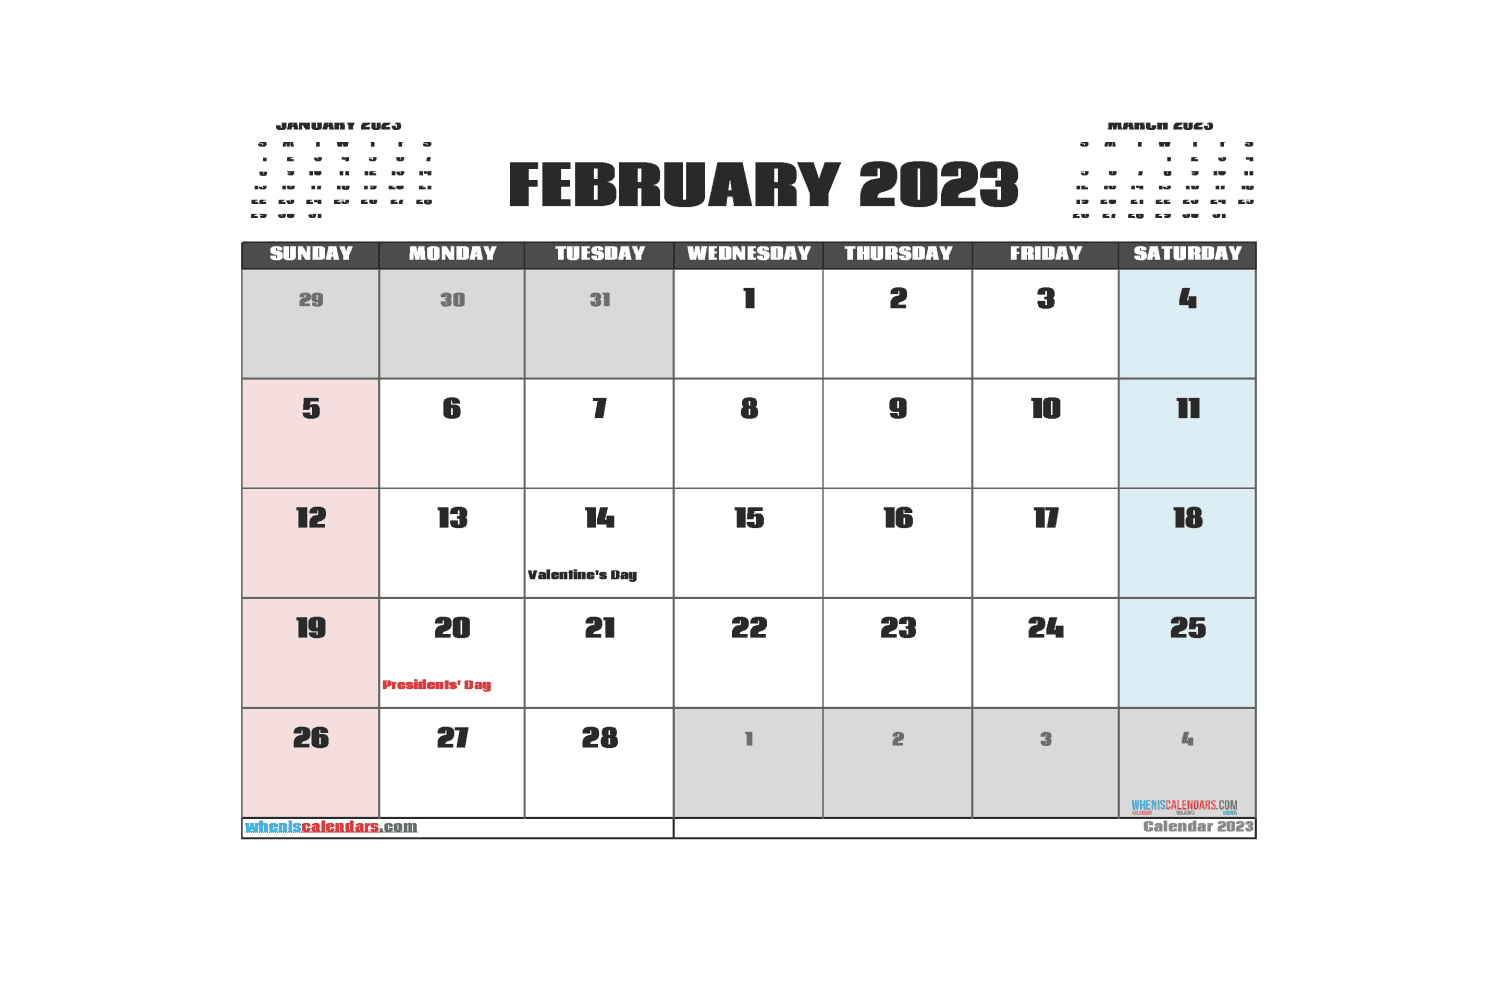 February calendar with holidays and different colors of dates.